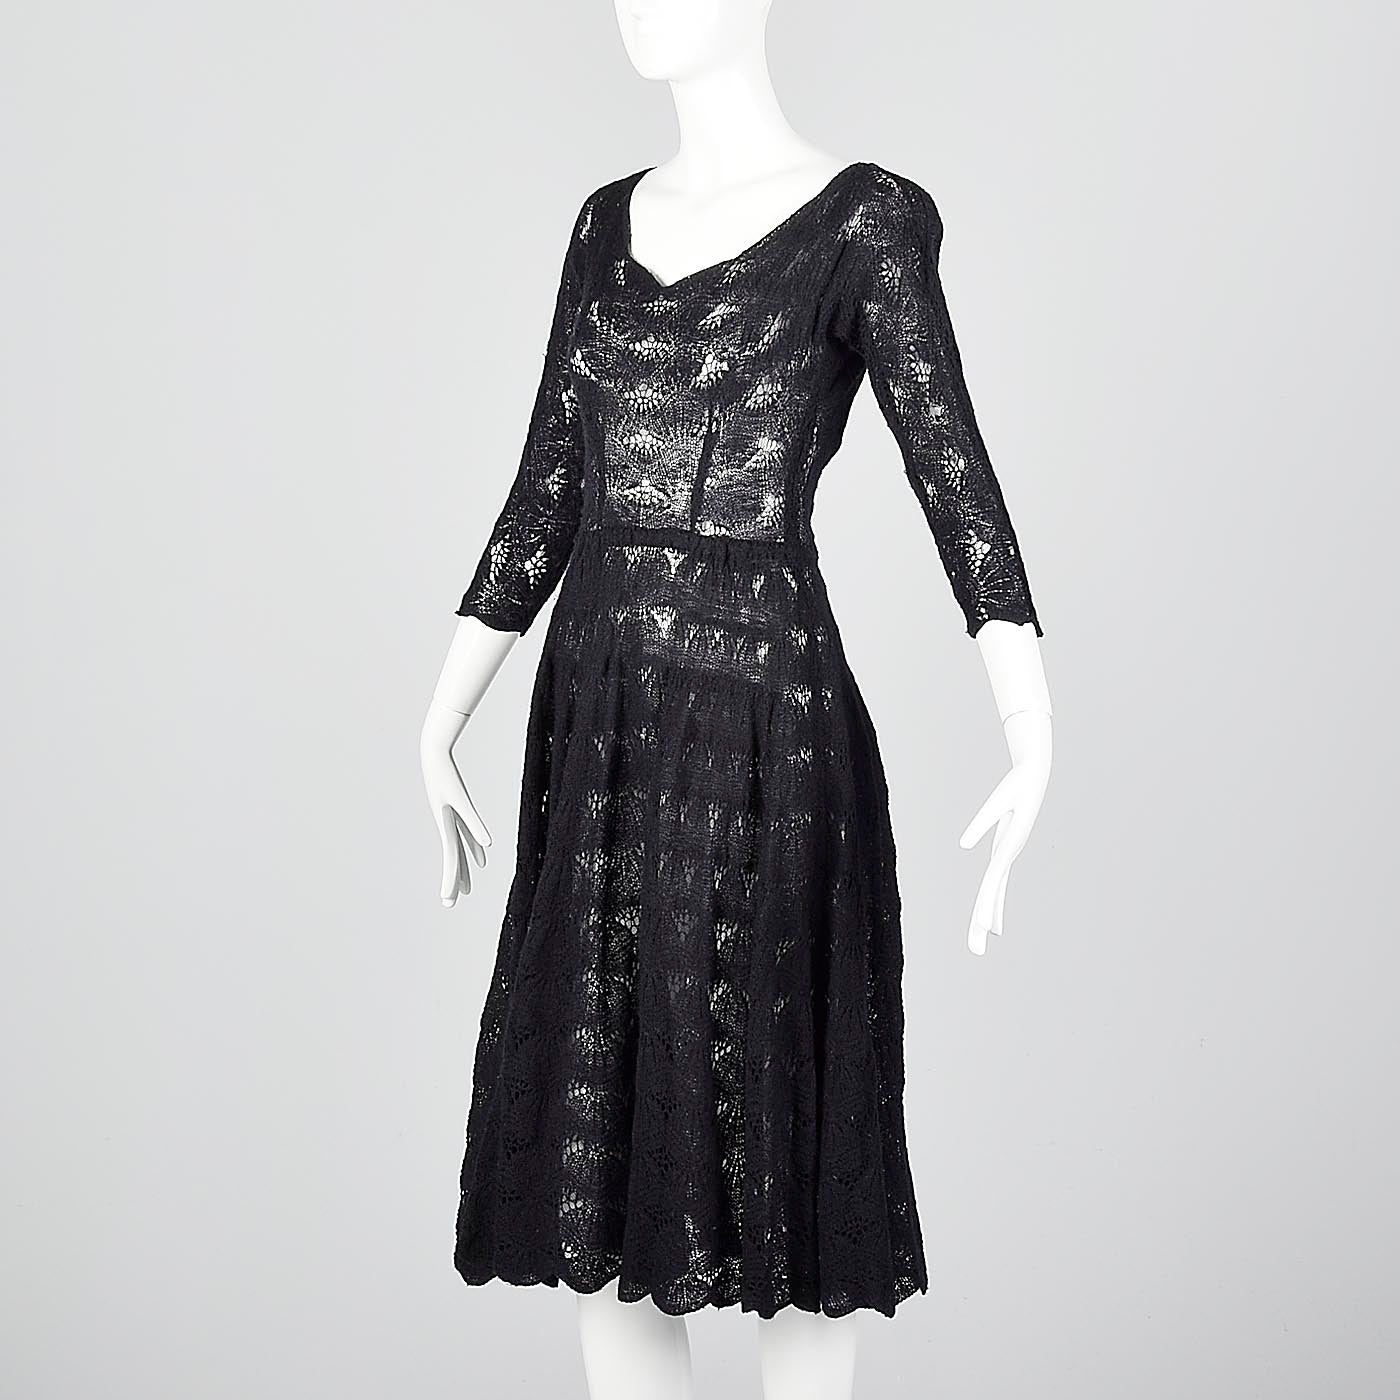 1950s Sexy Black Crochet Cocktail Dress with Full Skirt